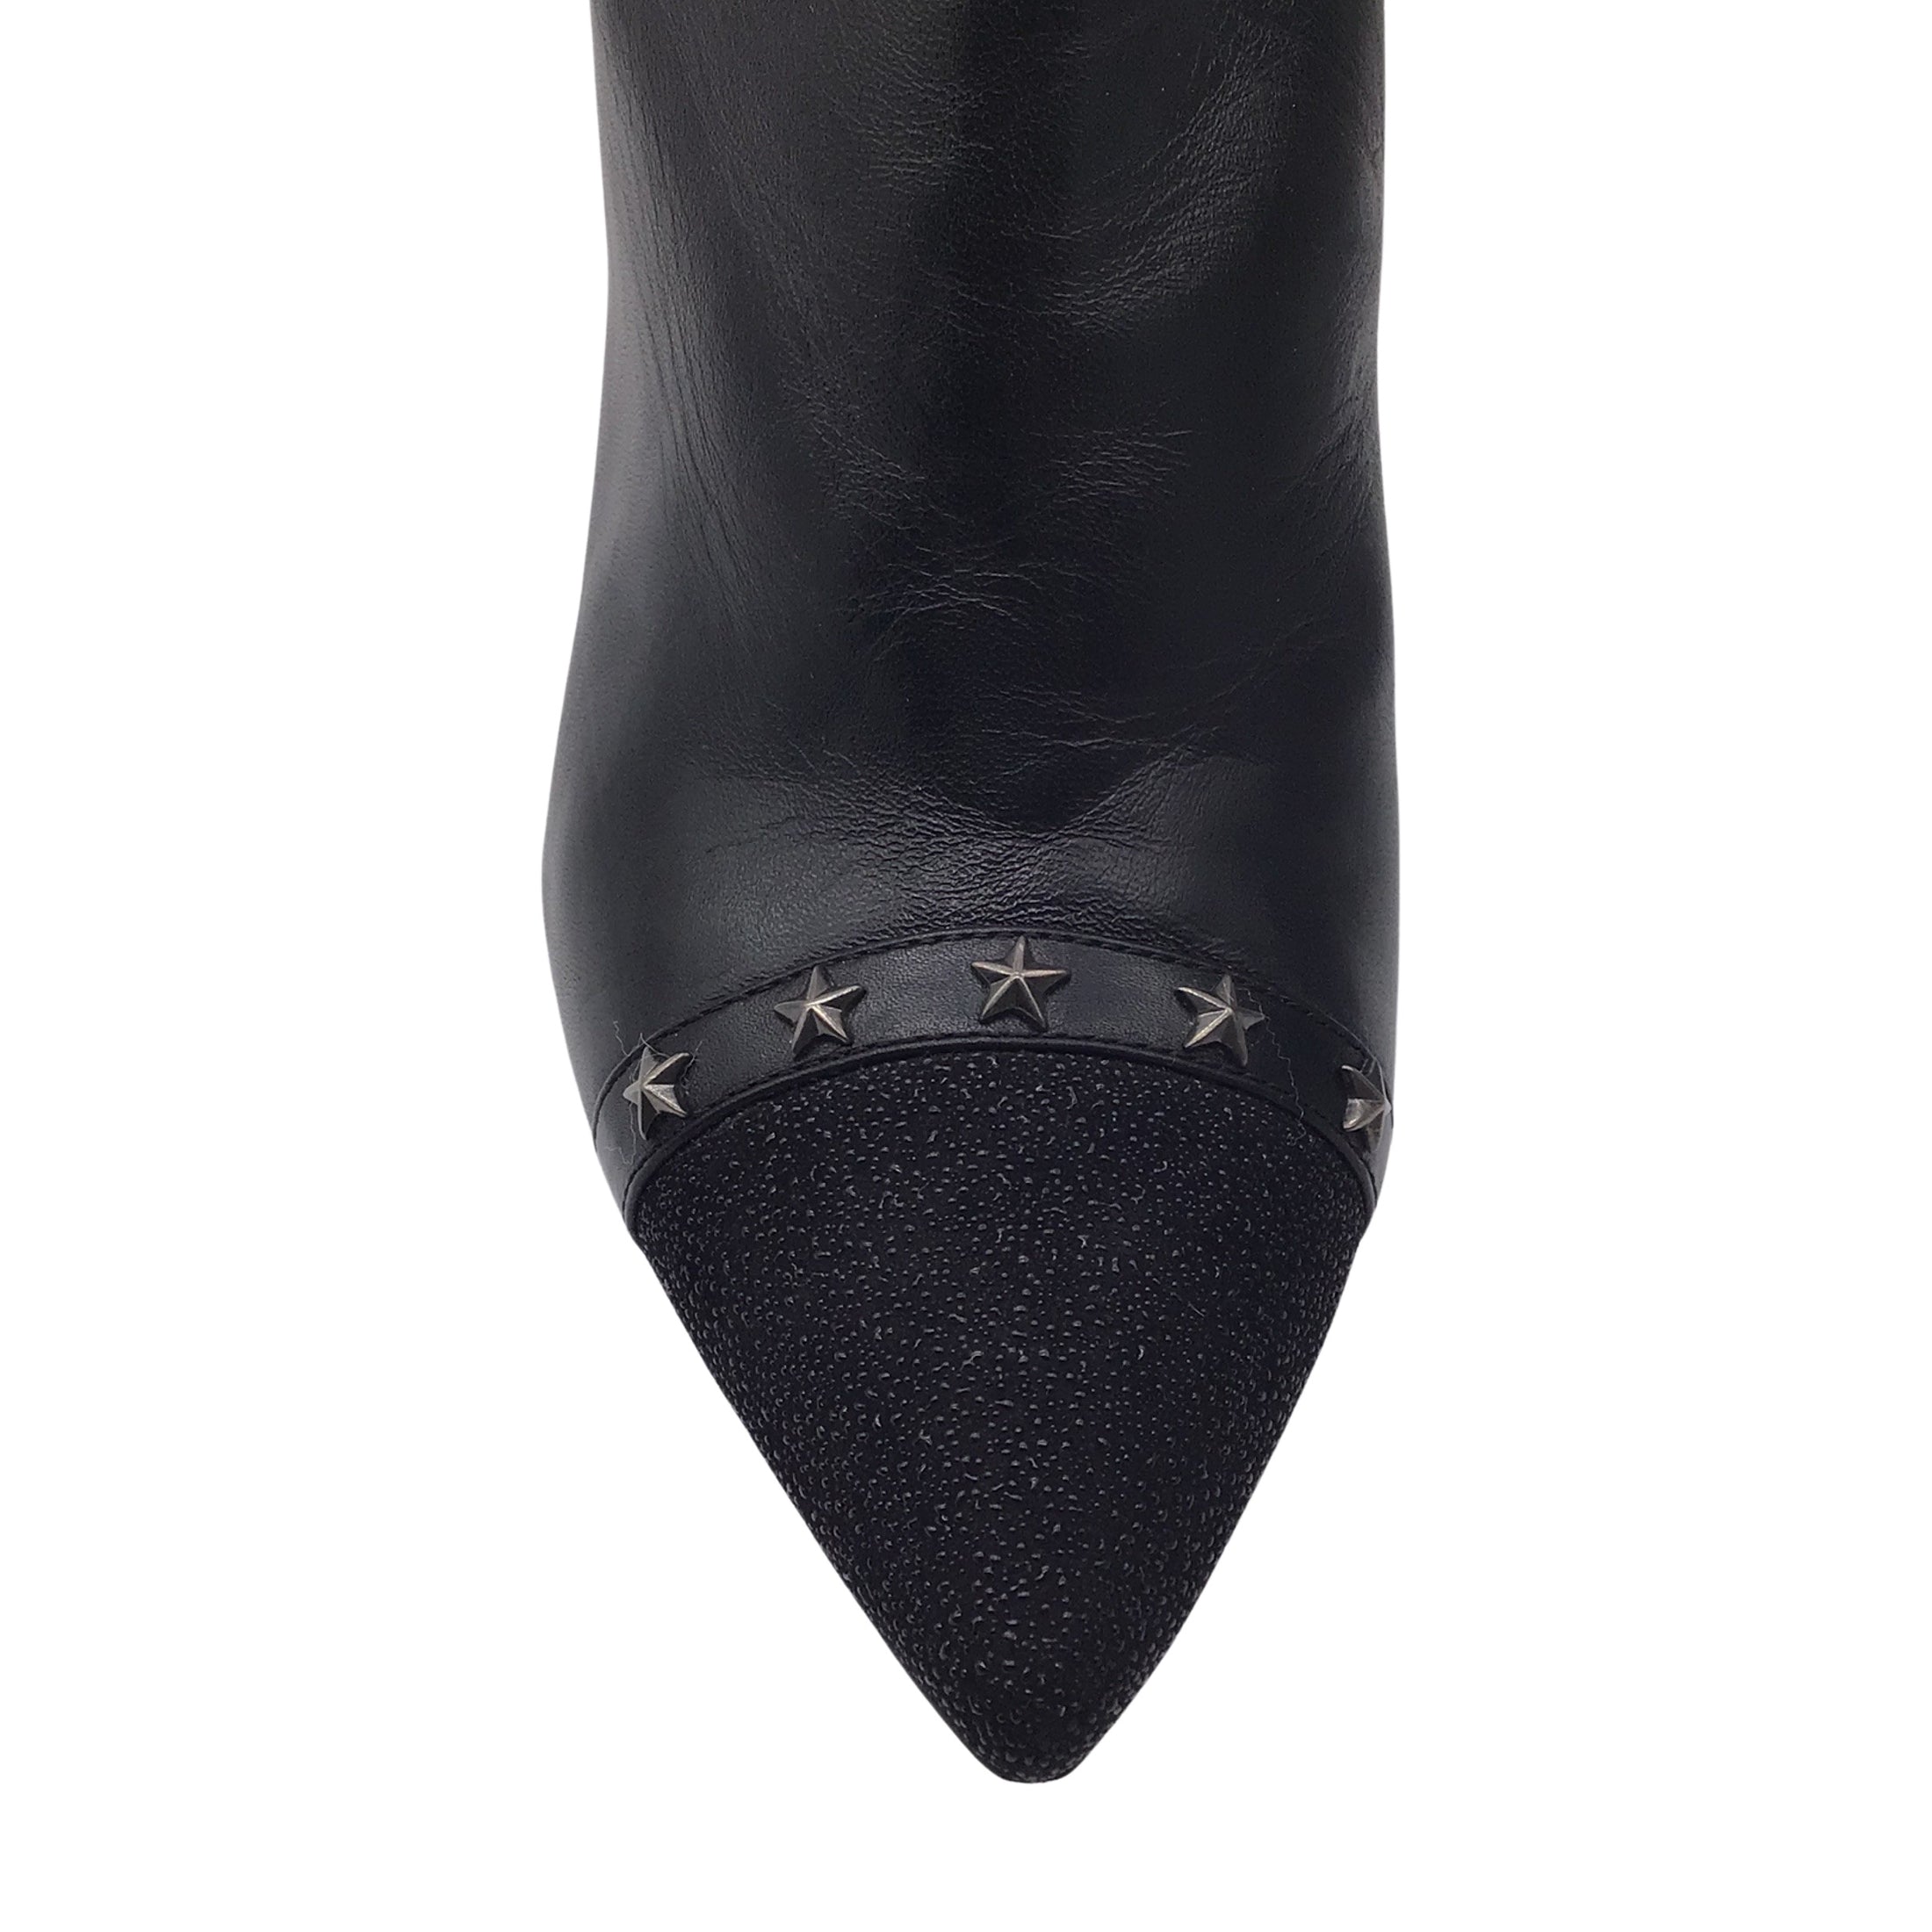 Longchamp Black Star Studded Pointed Toe Leather Ankle Boots